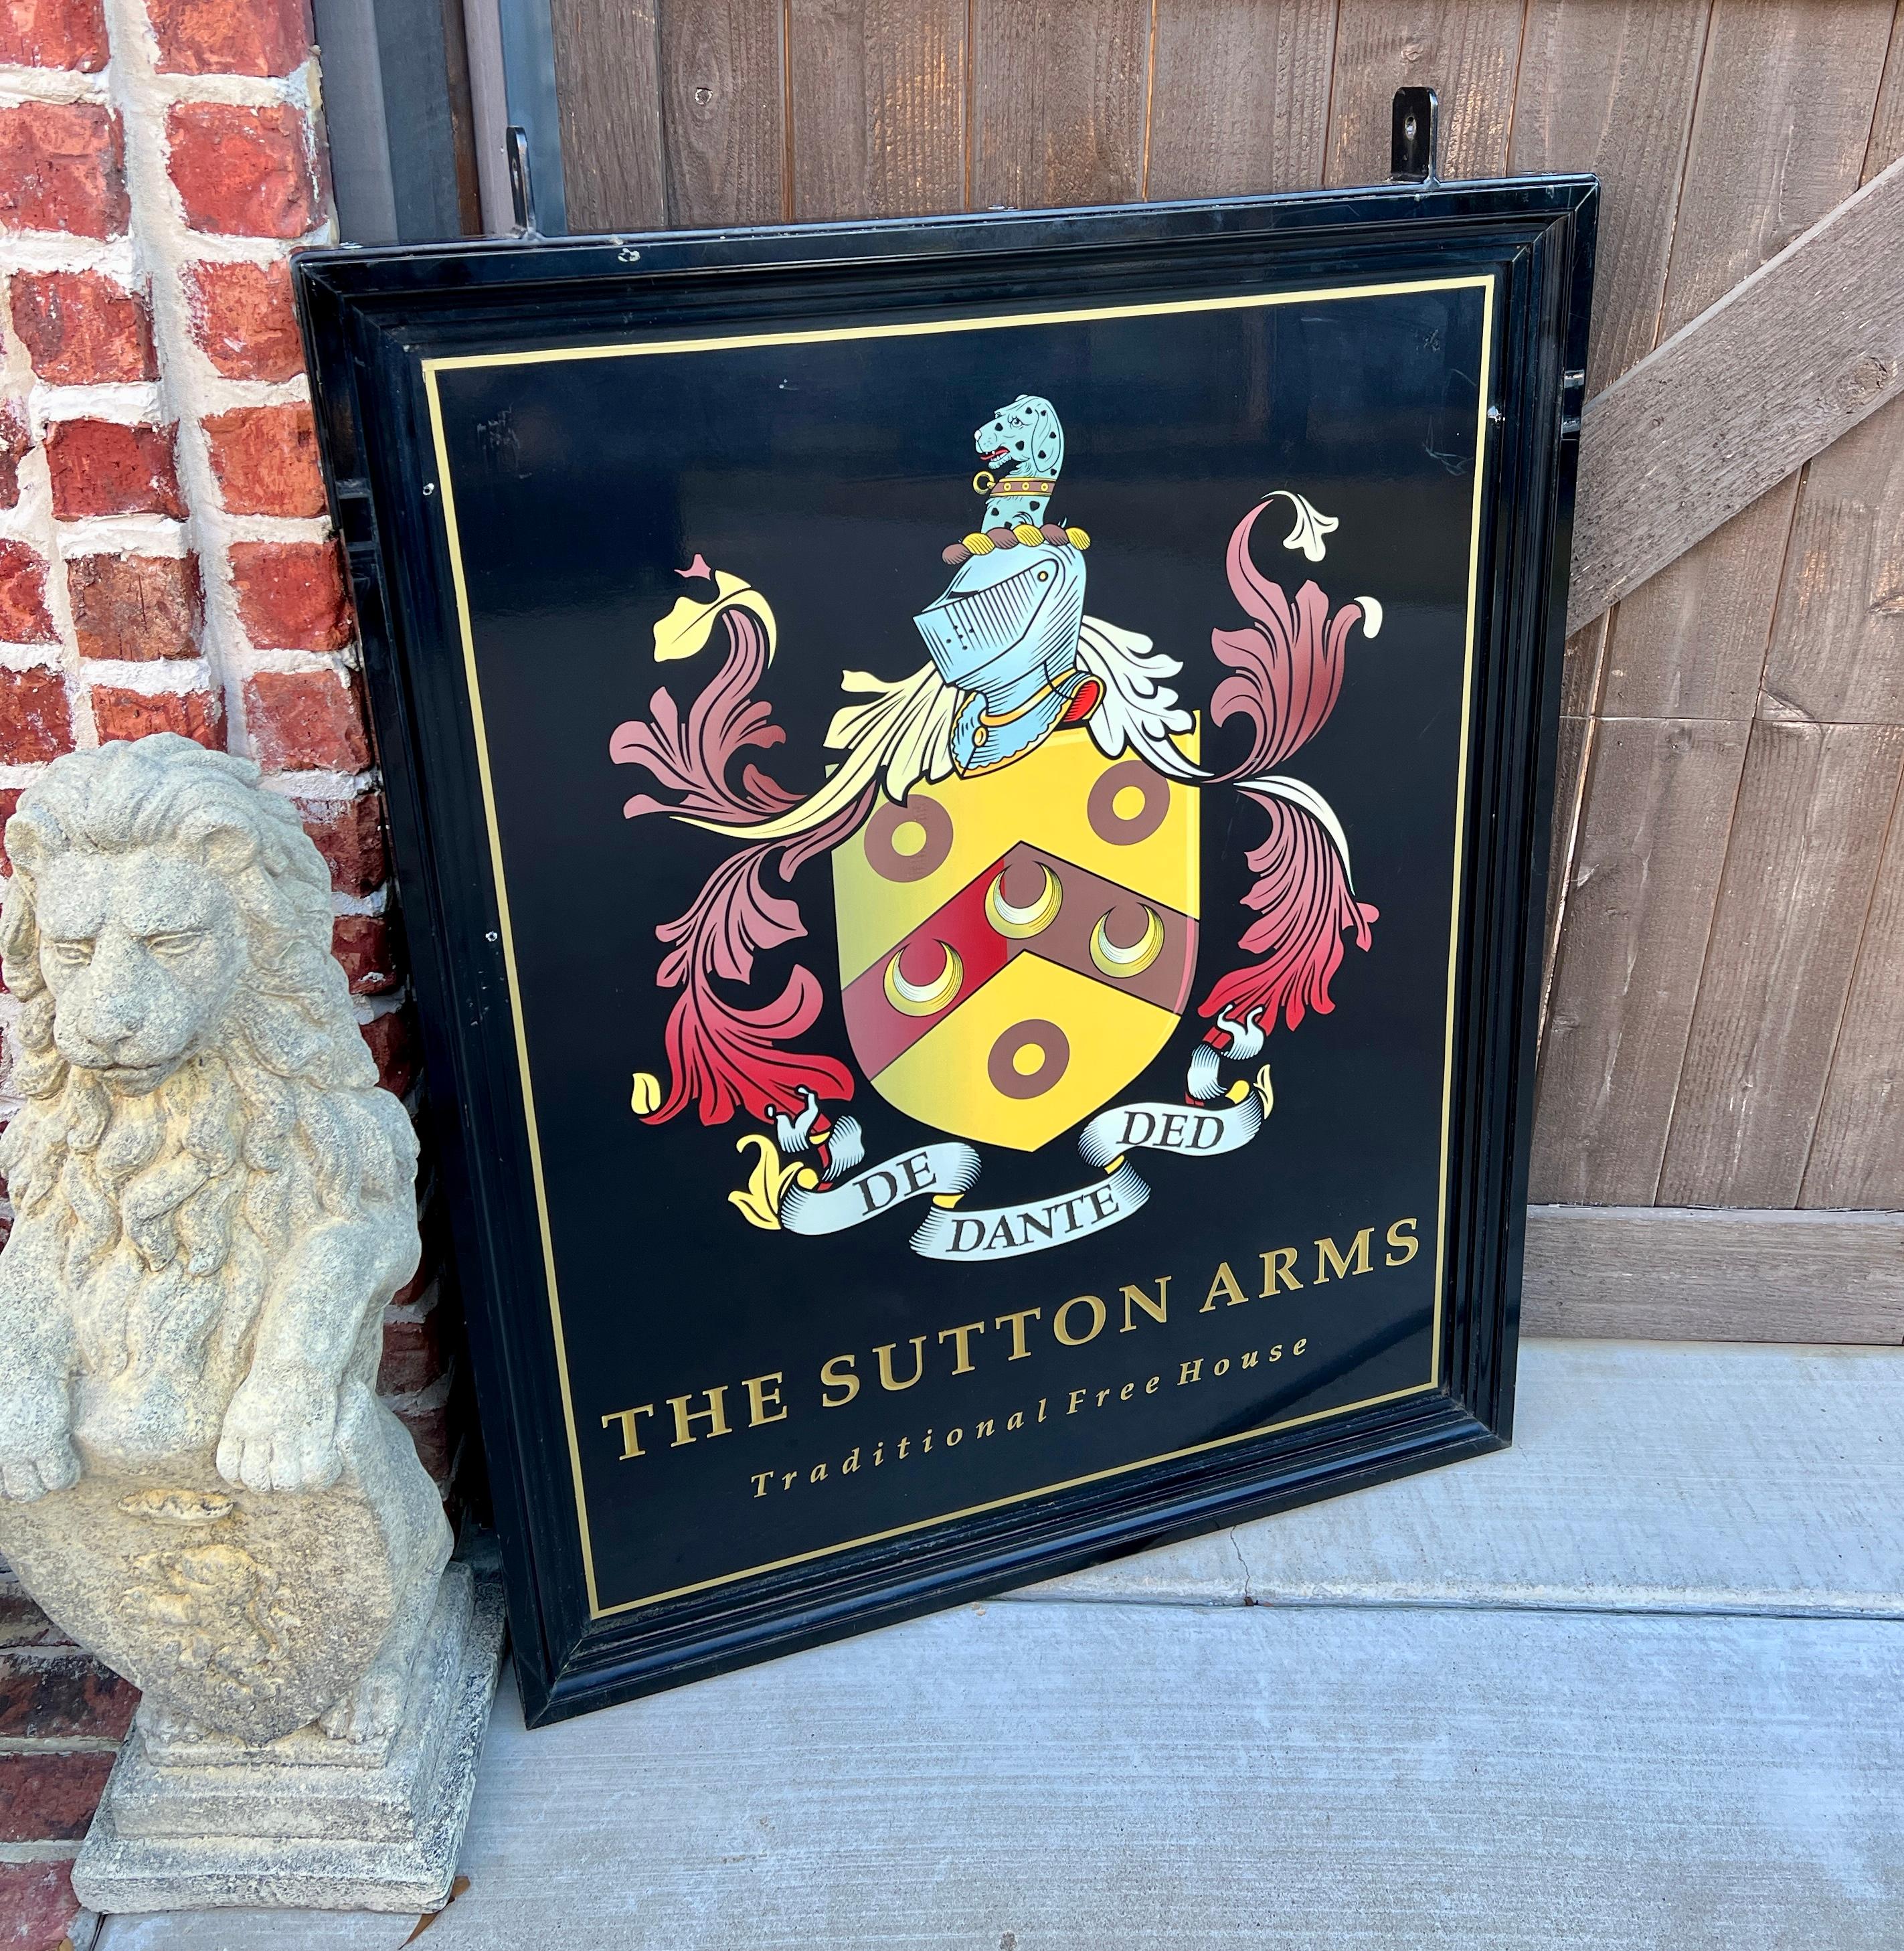 Vintage English Pub Sign Metal Double Sided Sutton Arms Traditional Free House In Good Condition For Sale In Tyler, TX